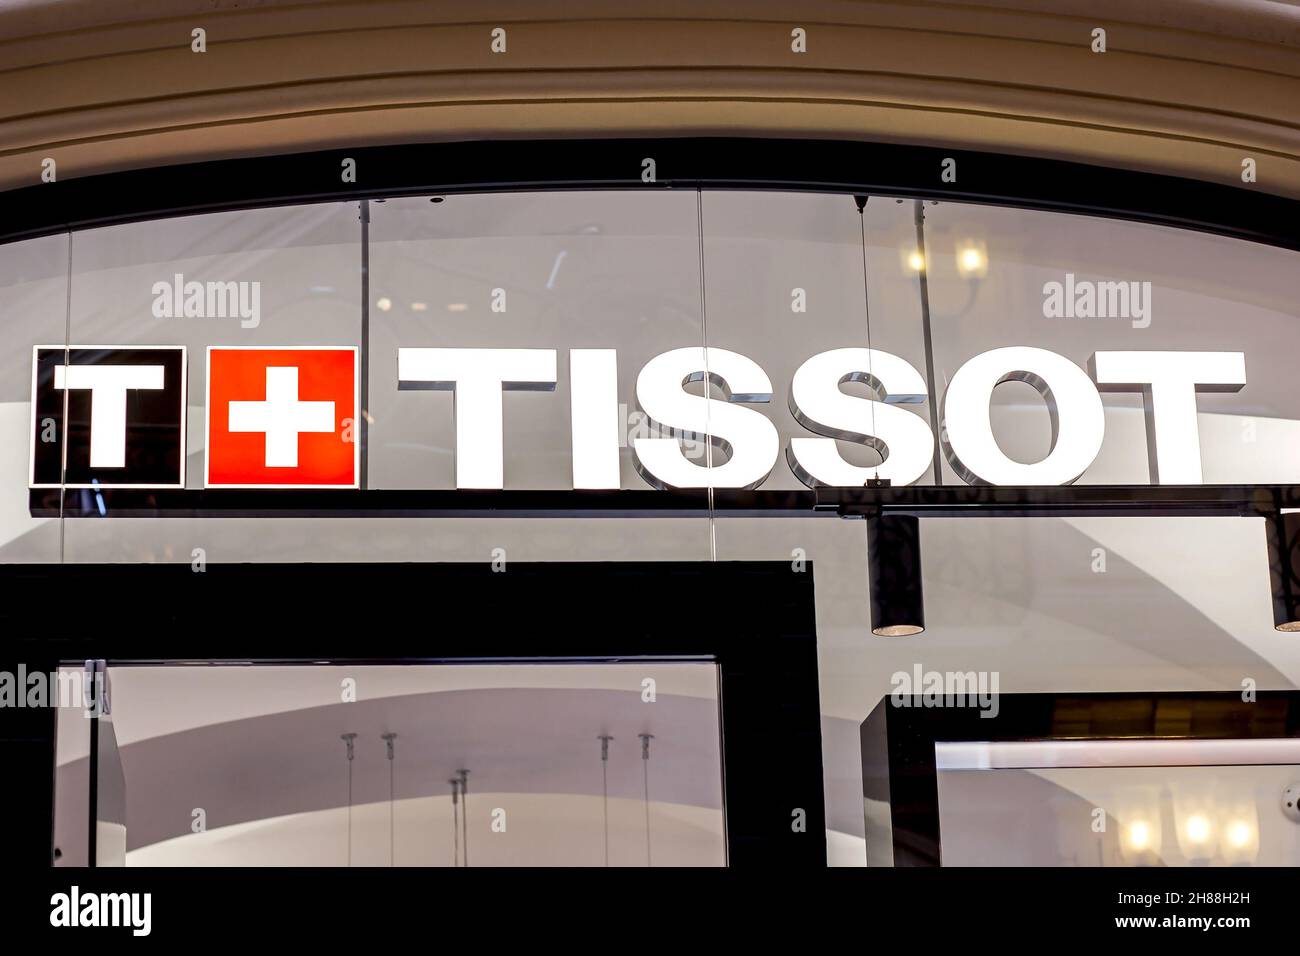 MOSCOW, RUSSIA - AUGUST 10, 2021: Tissot brand retail shop logo signboard on the storefront in the shopping mall. Stock Photo